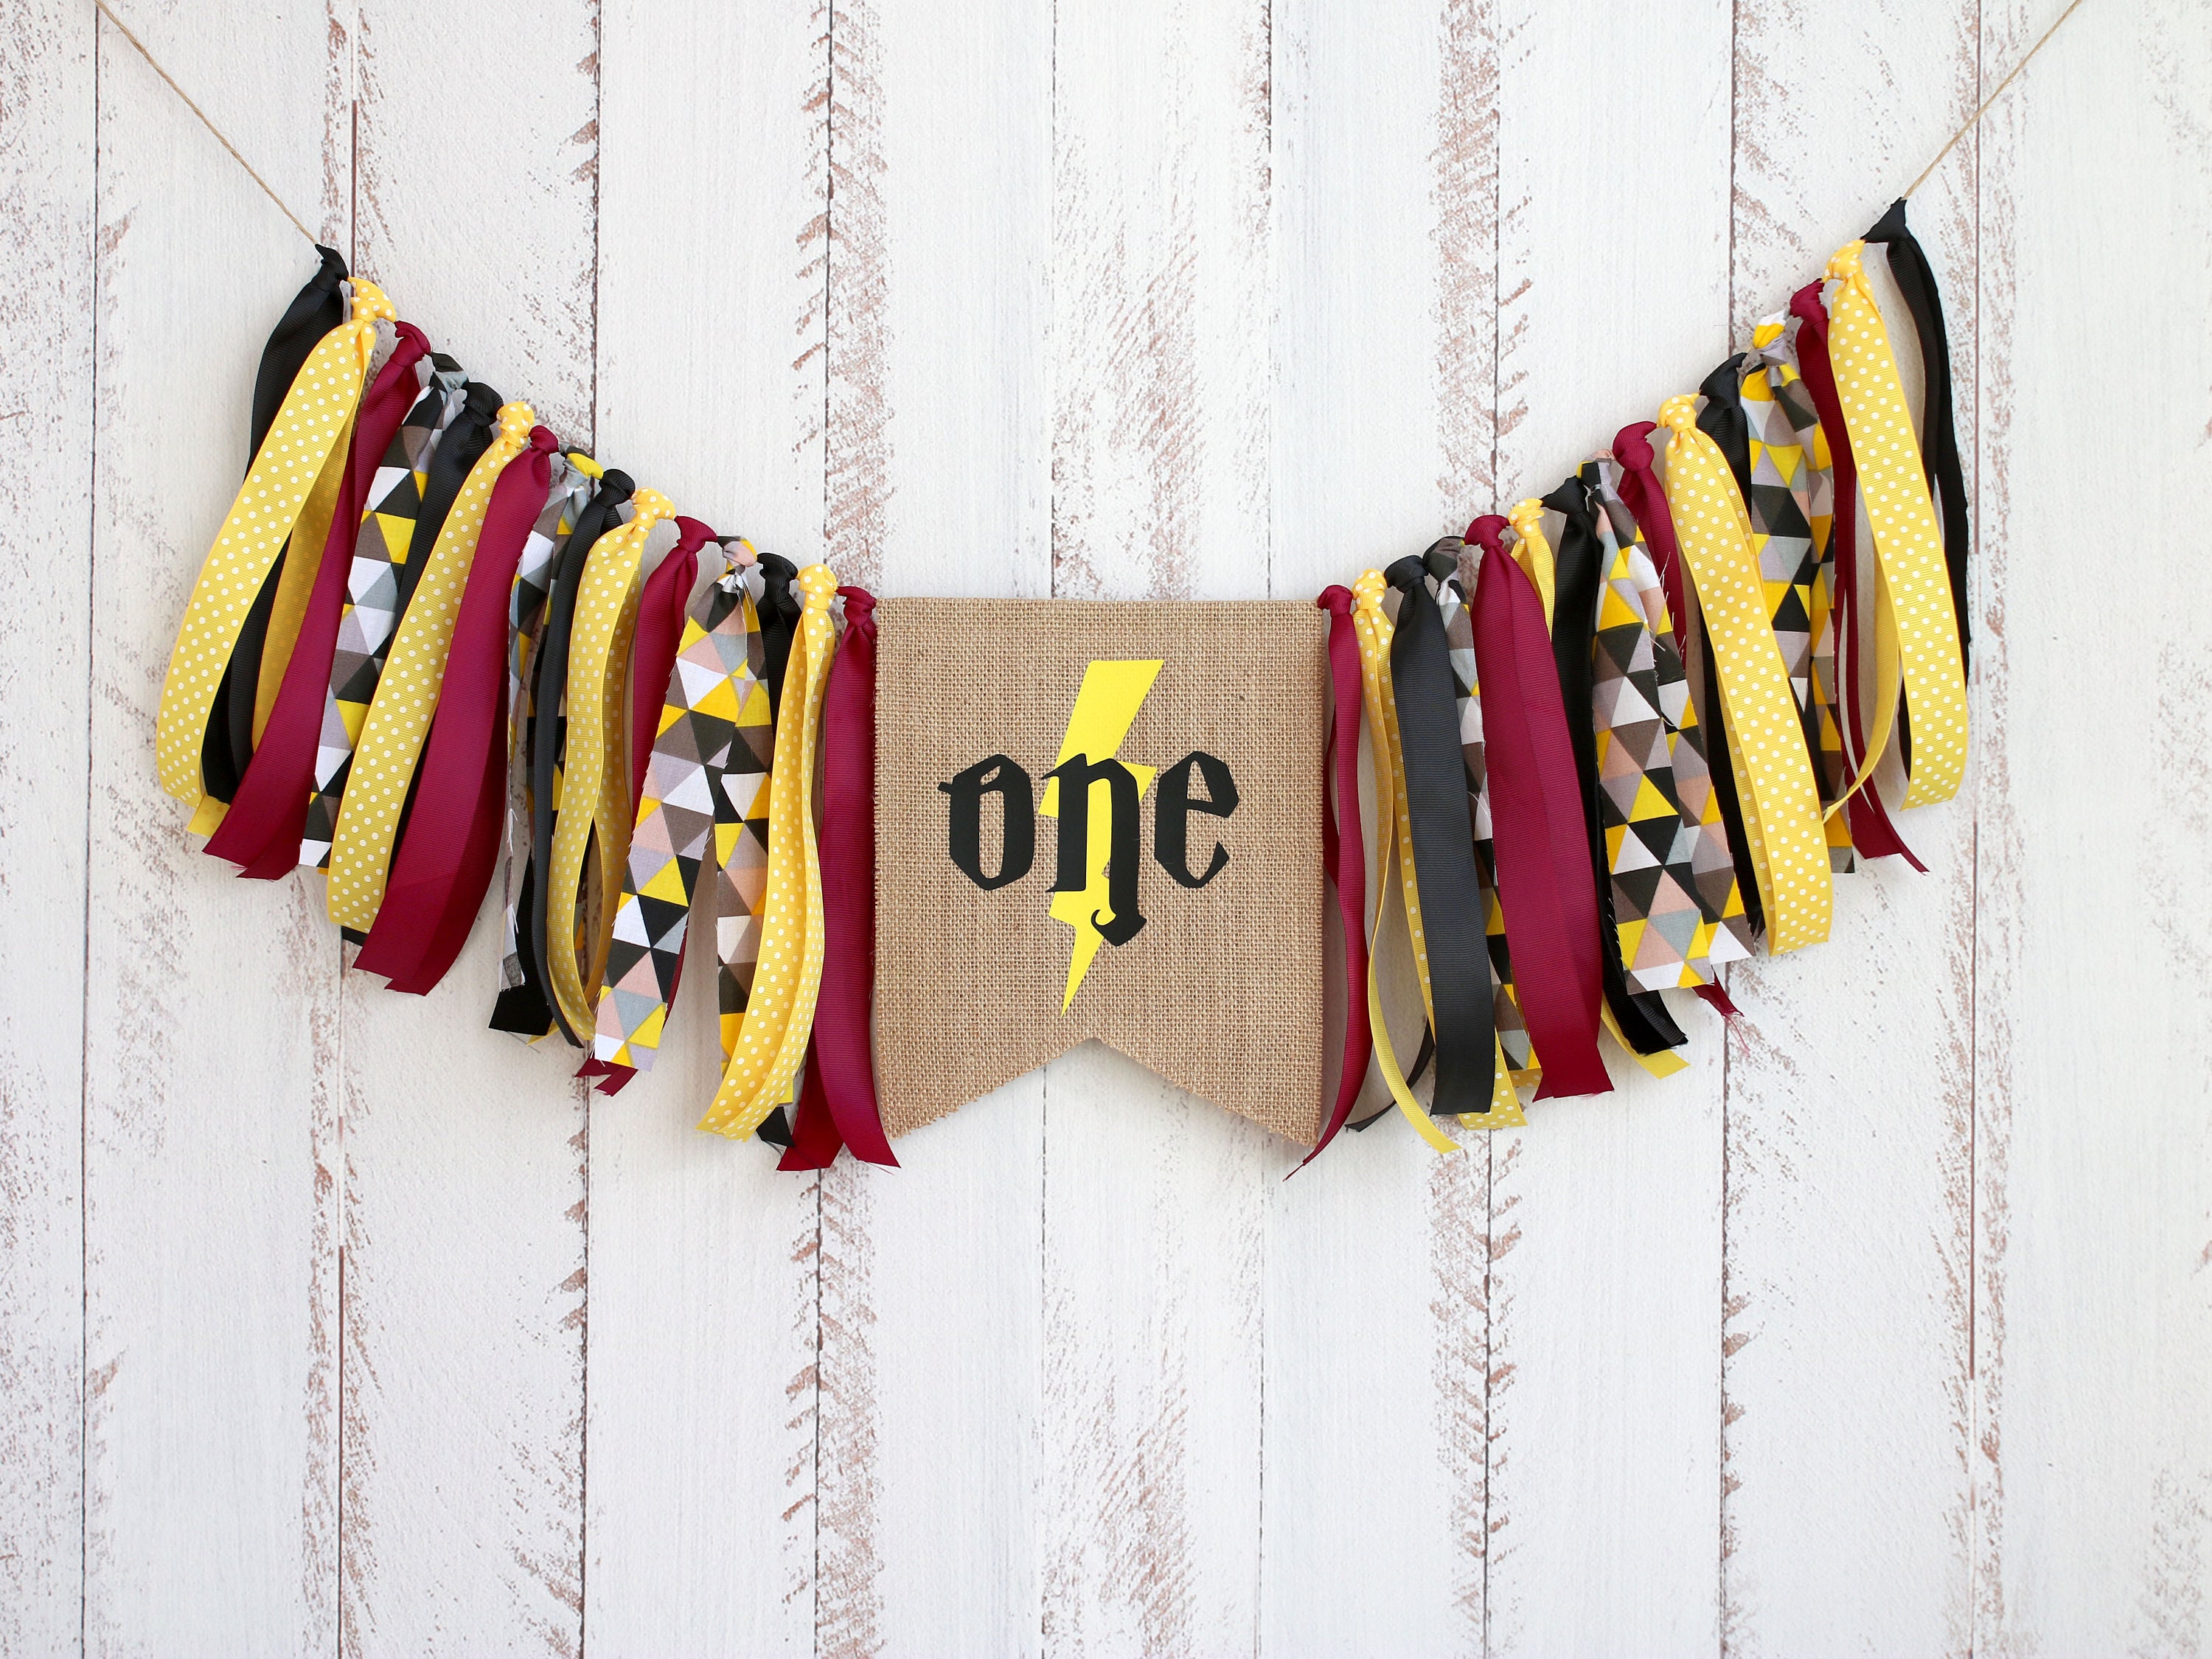 One Potter Highchair Banner,Harry Party Birthday Decorations, Potter Inspired High Chairbanner, Harry Cake Smash Outfit Girl, First 1st Birthday